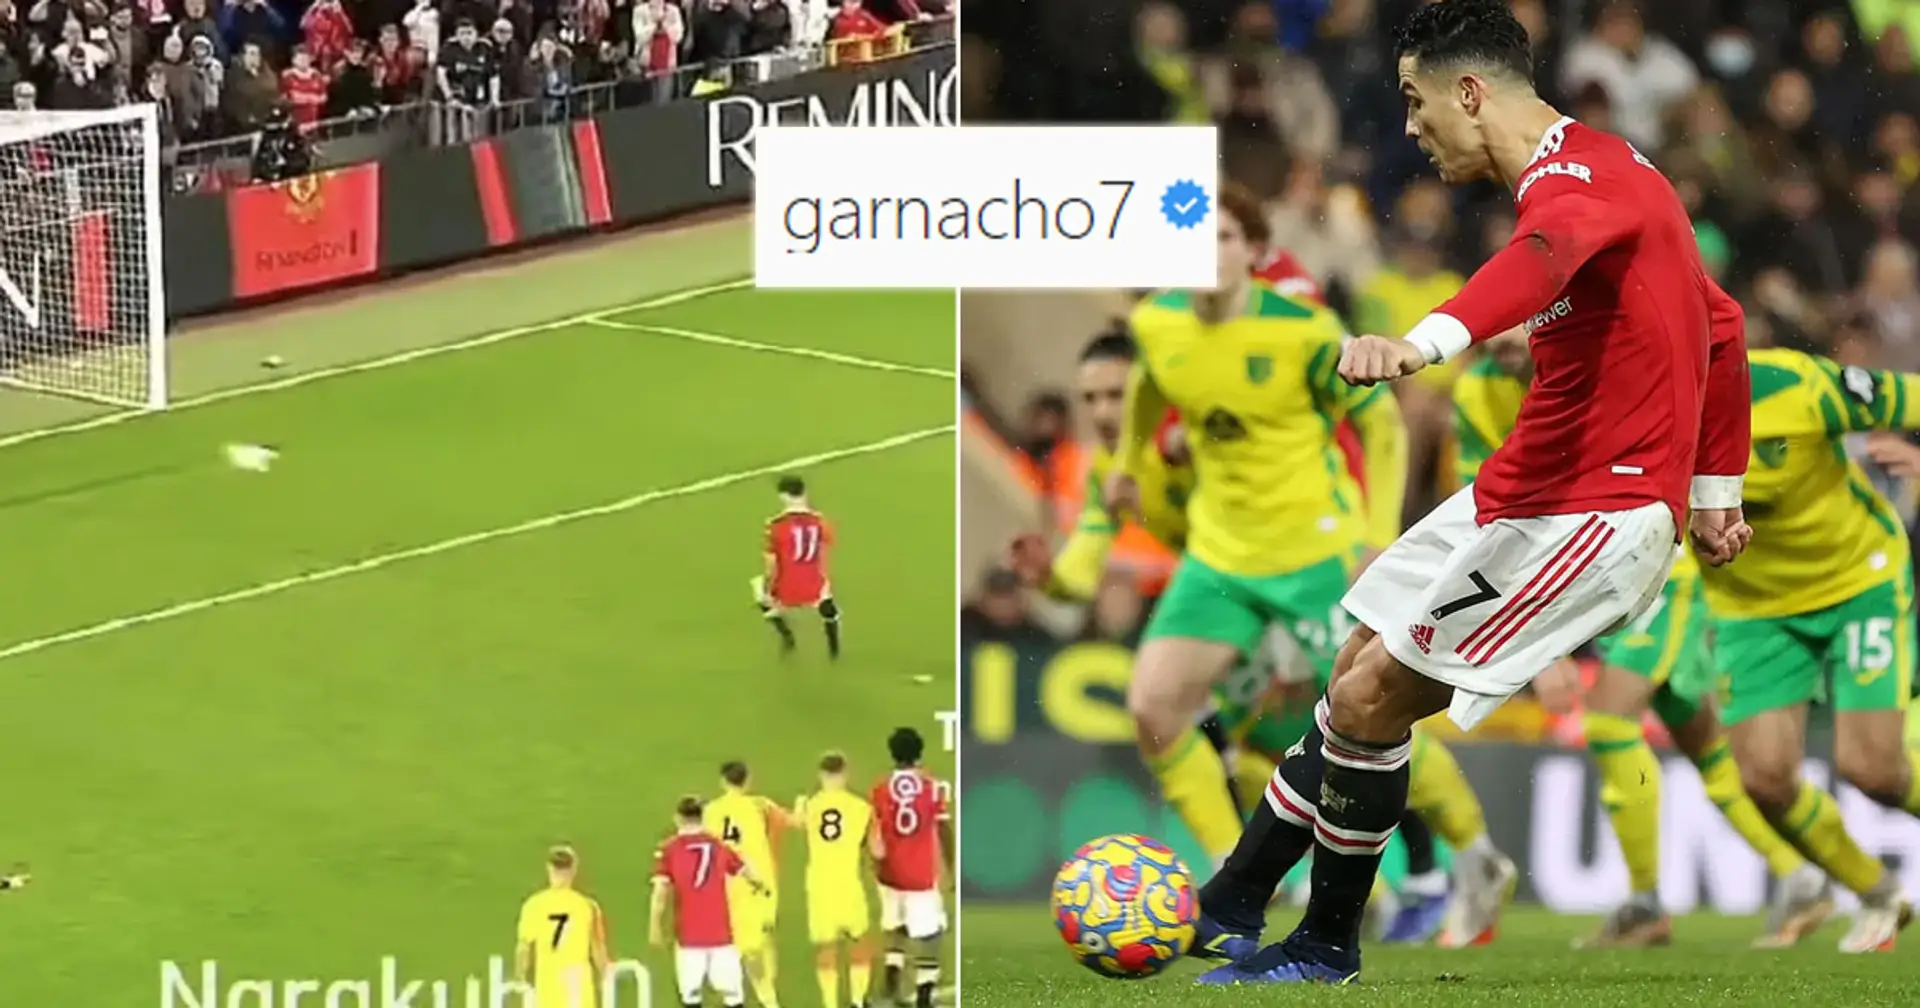 Garnacho calls Ronaldo 'the GOAT' after FA Youth Cup heroics - United fans can't stop gushing over it